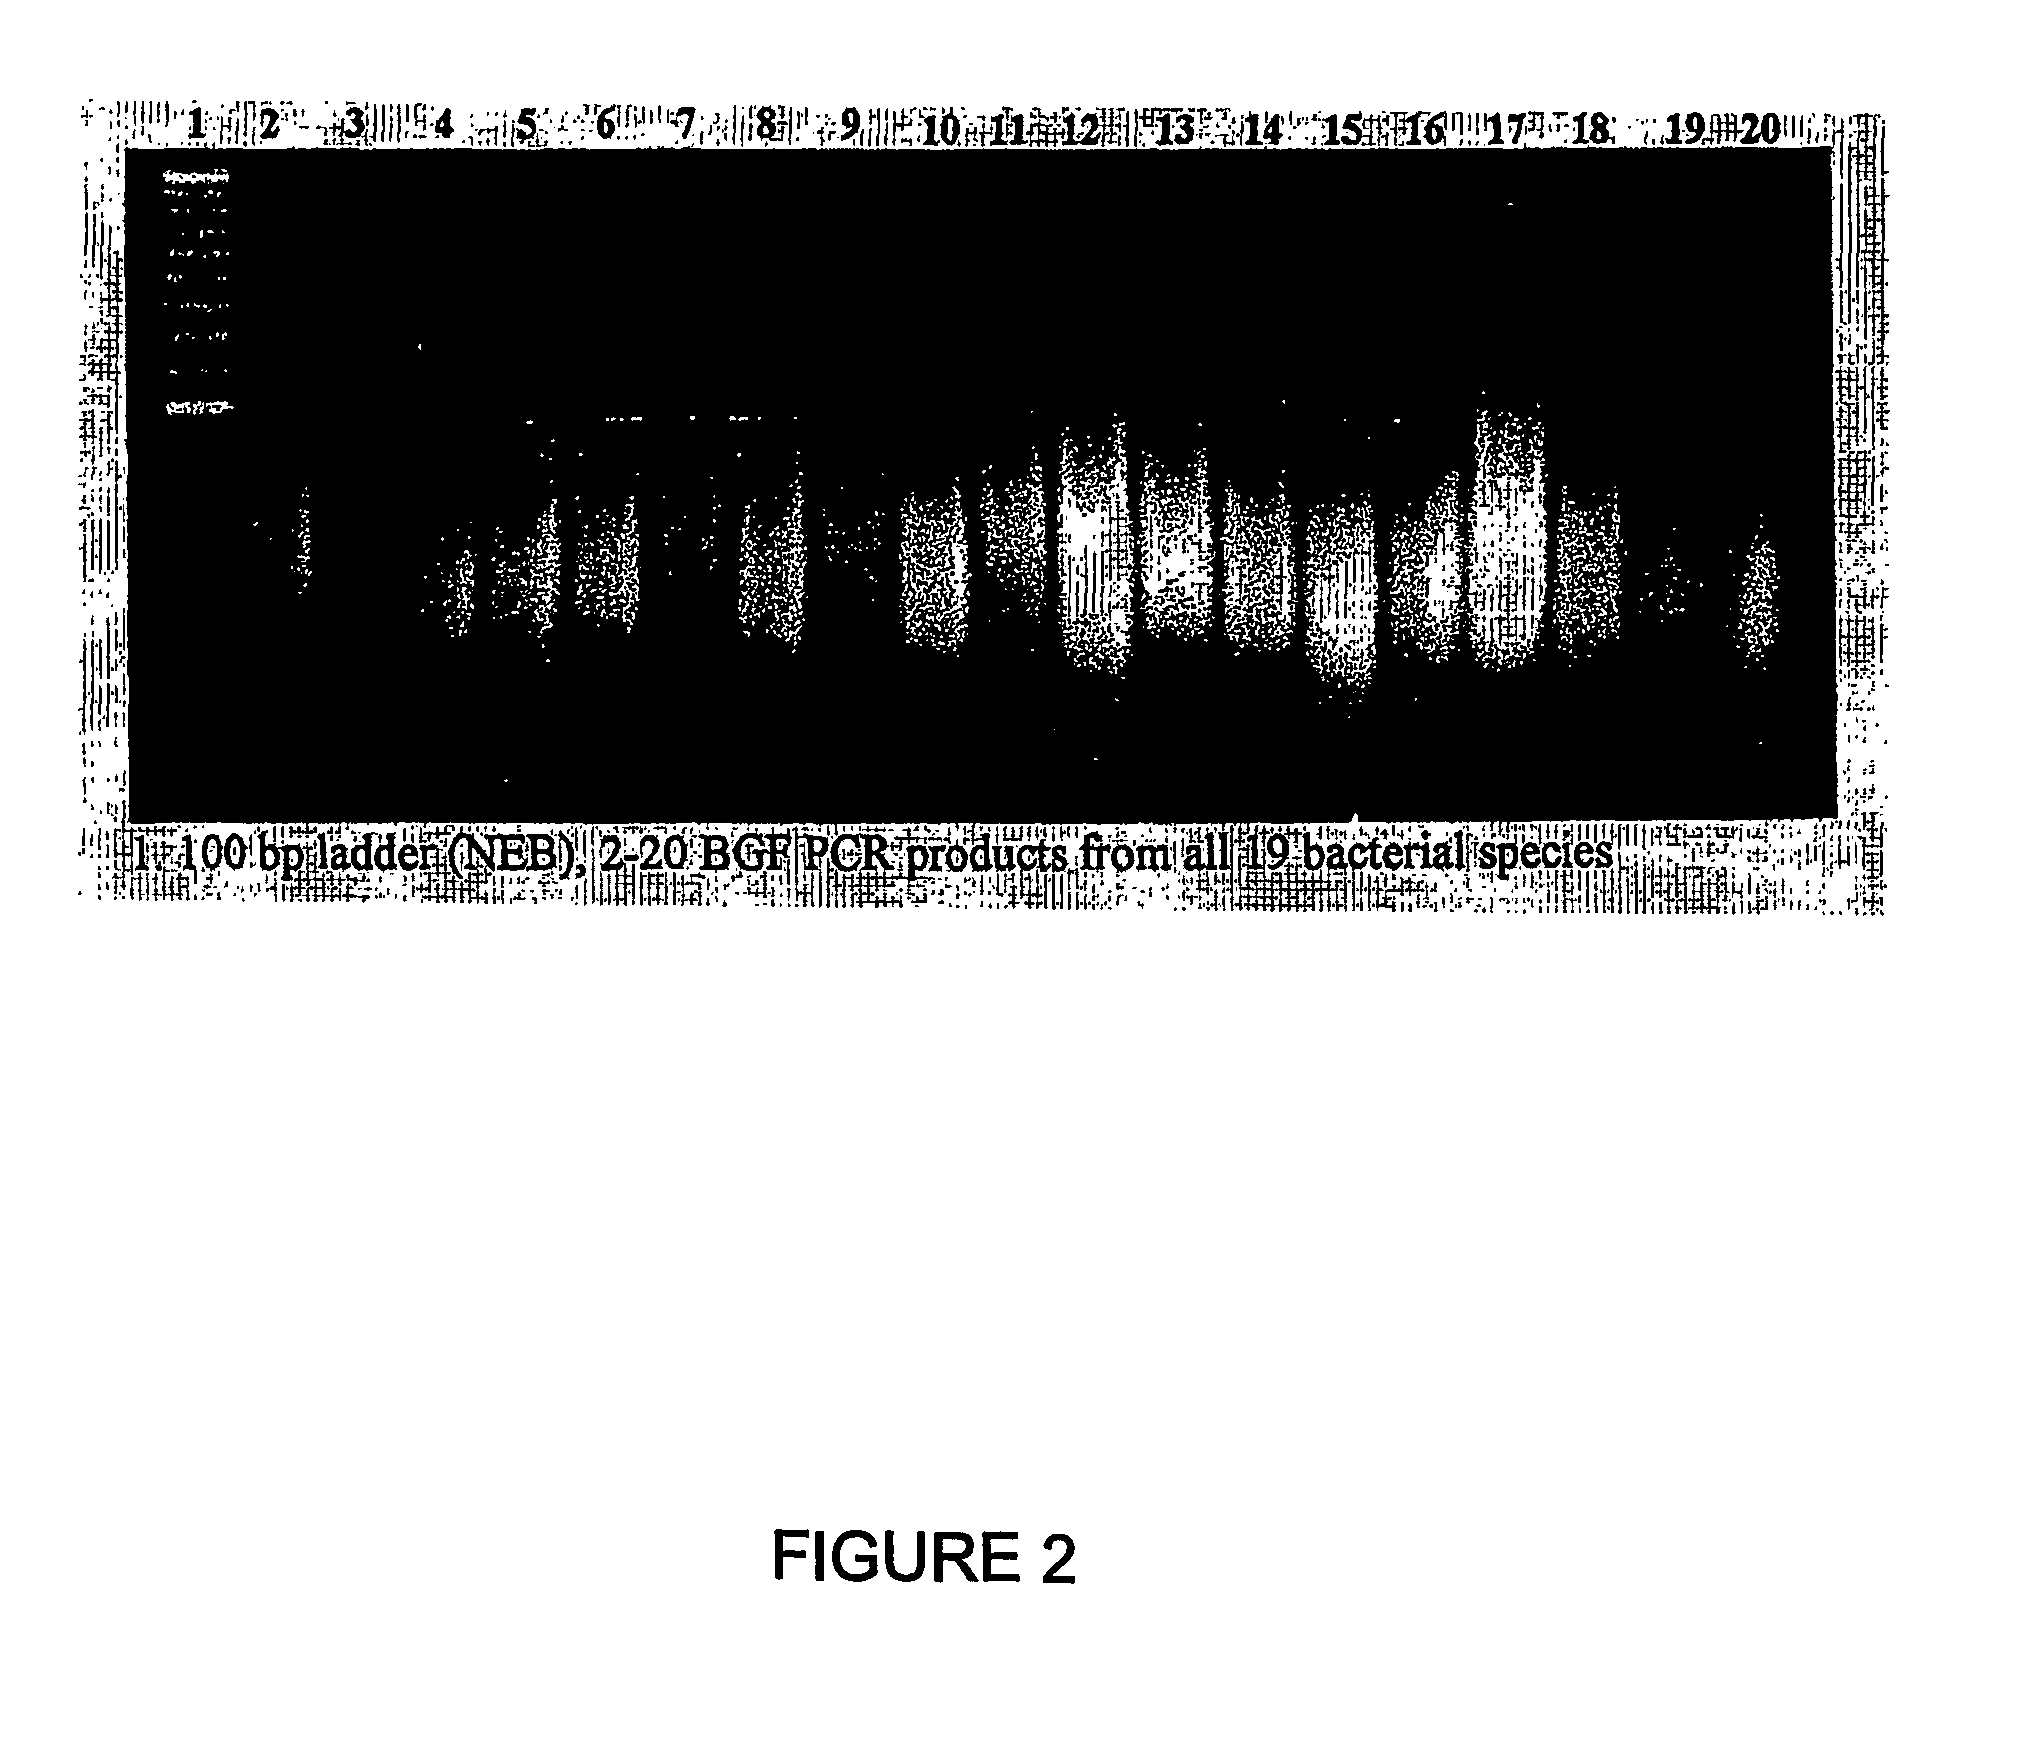 Methods of constructing biodiverse gene fragment libraries and biological modulators isolated therefrom